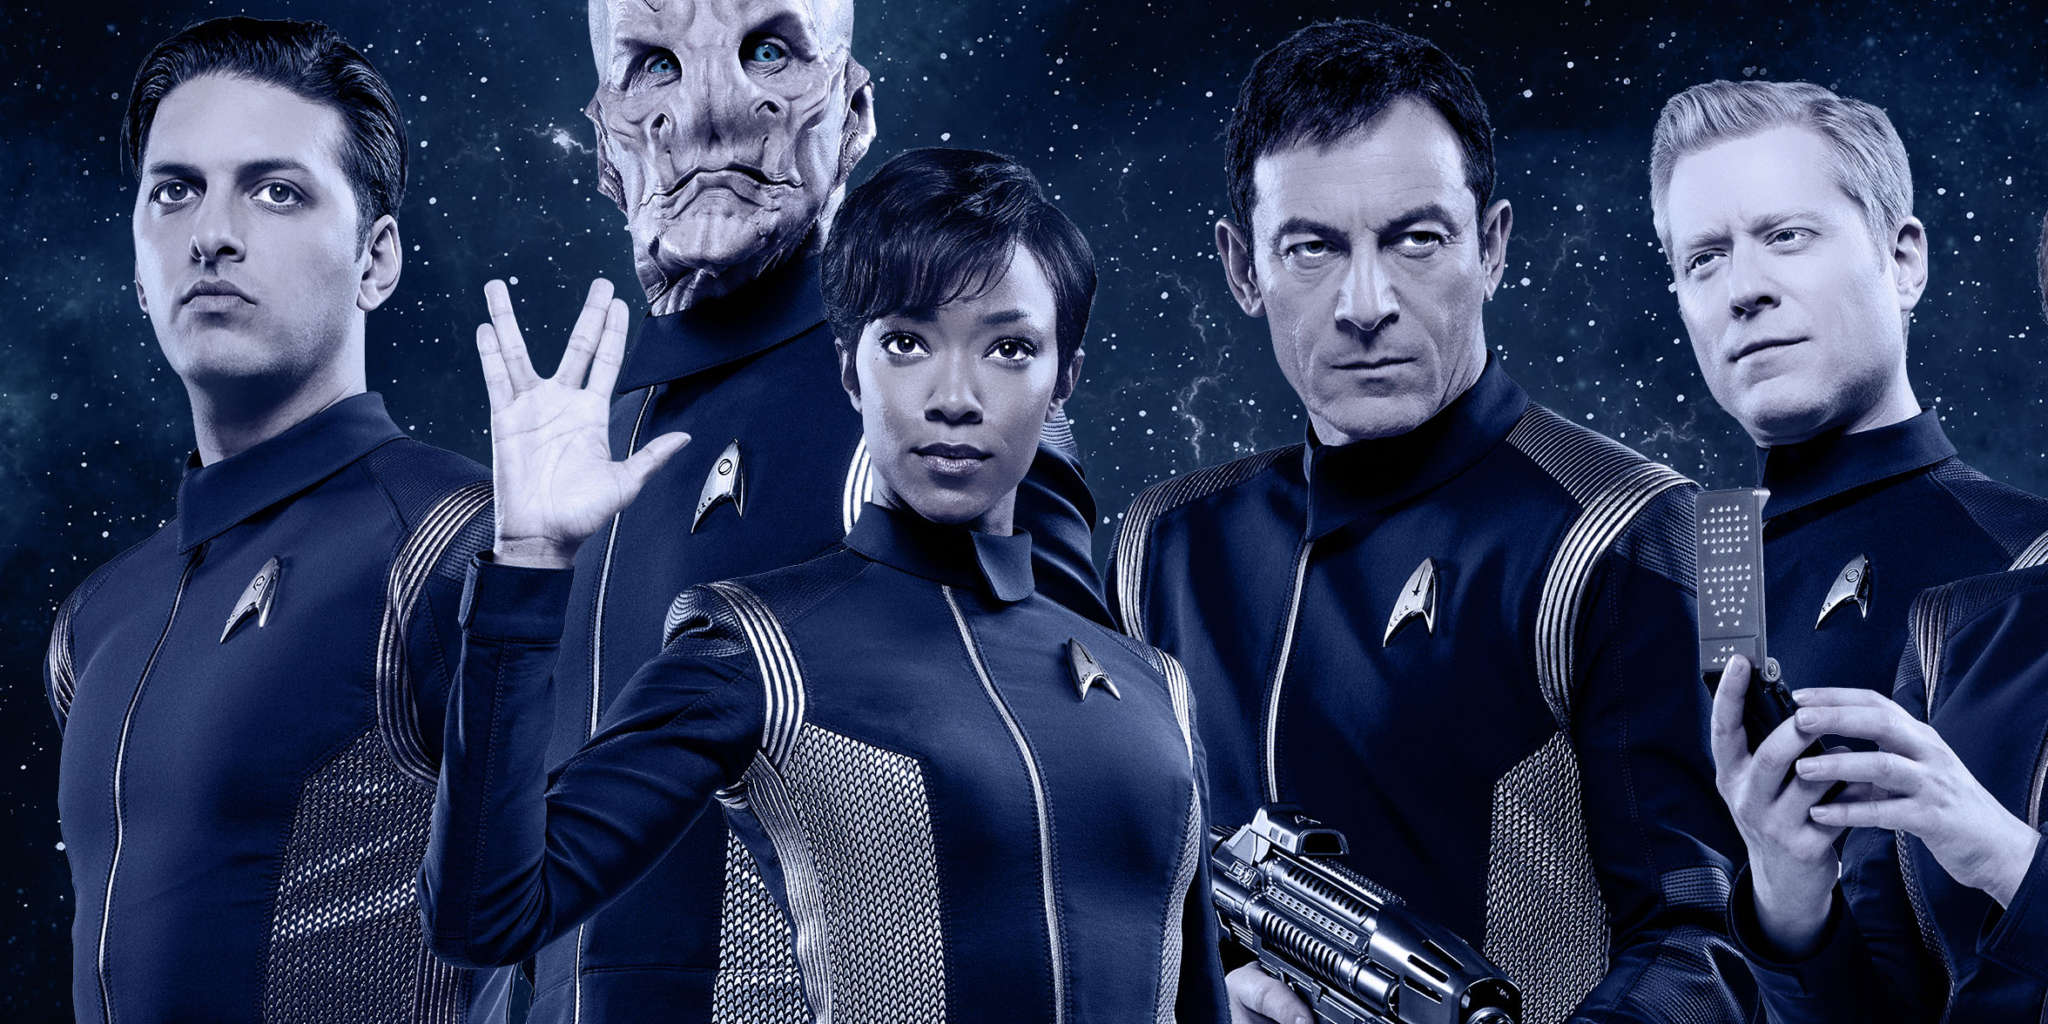 HD desktop wallpaper featuring characters from Star Trek: Discovery in uniform against a cosmic backdrop.